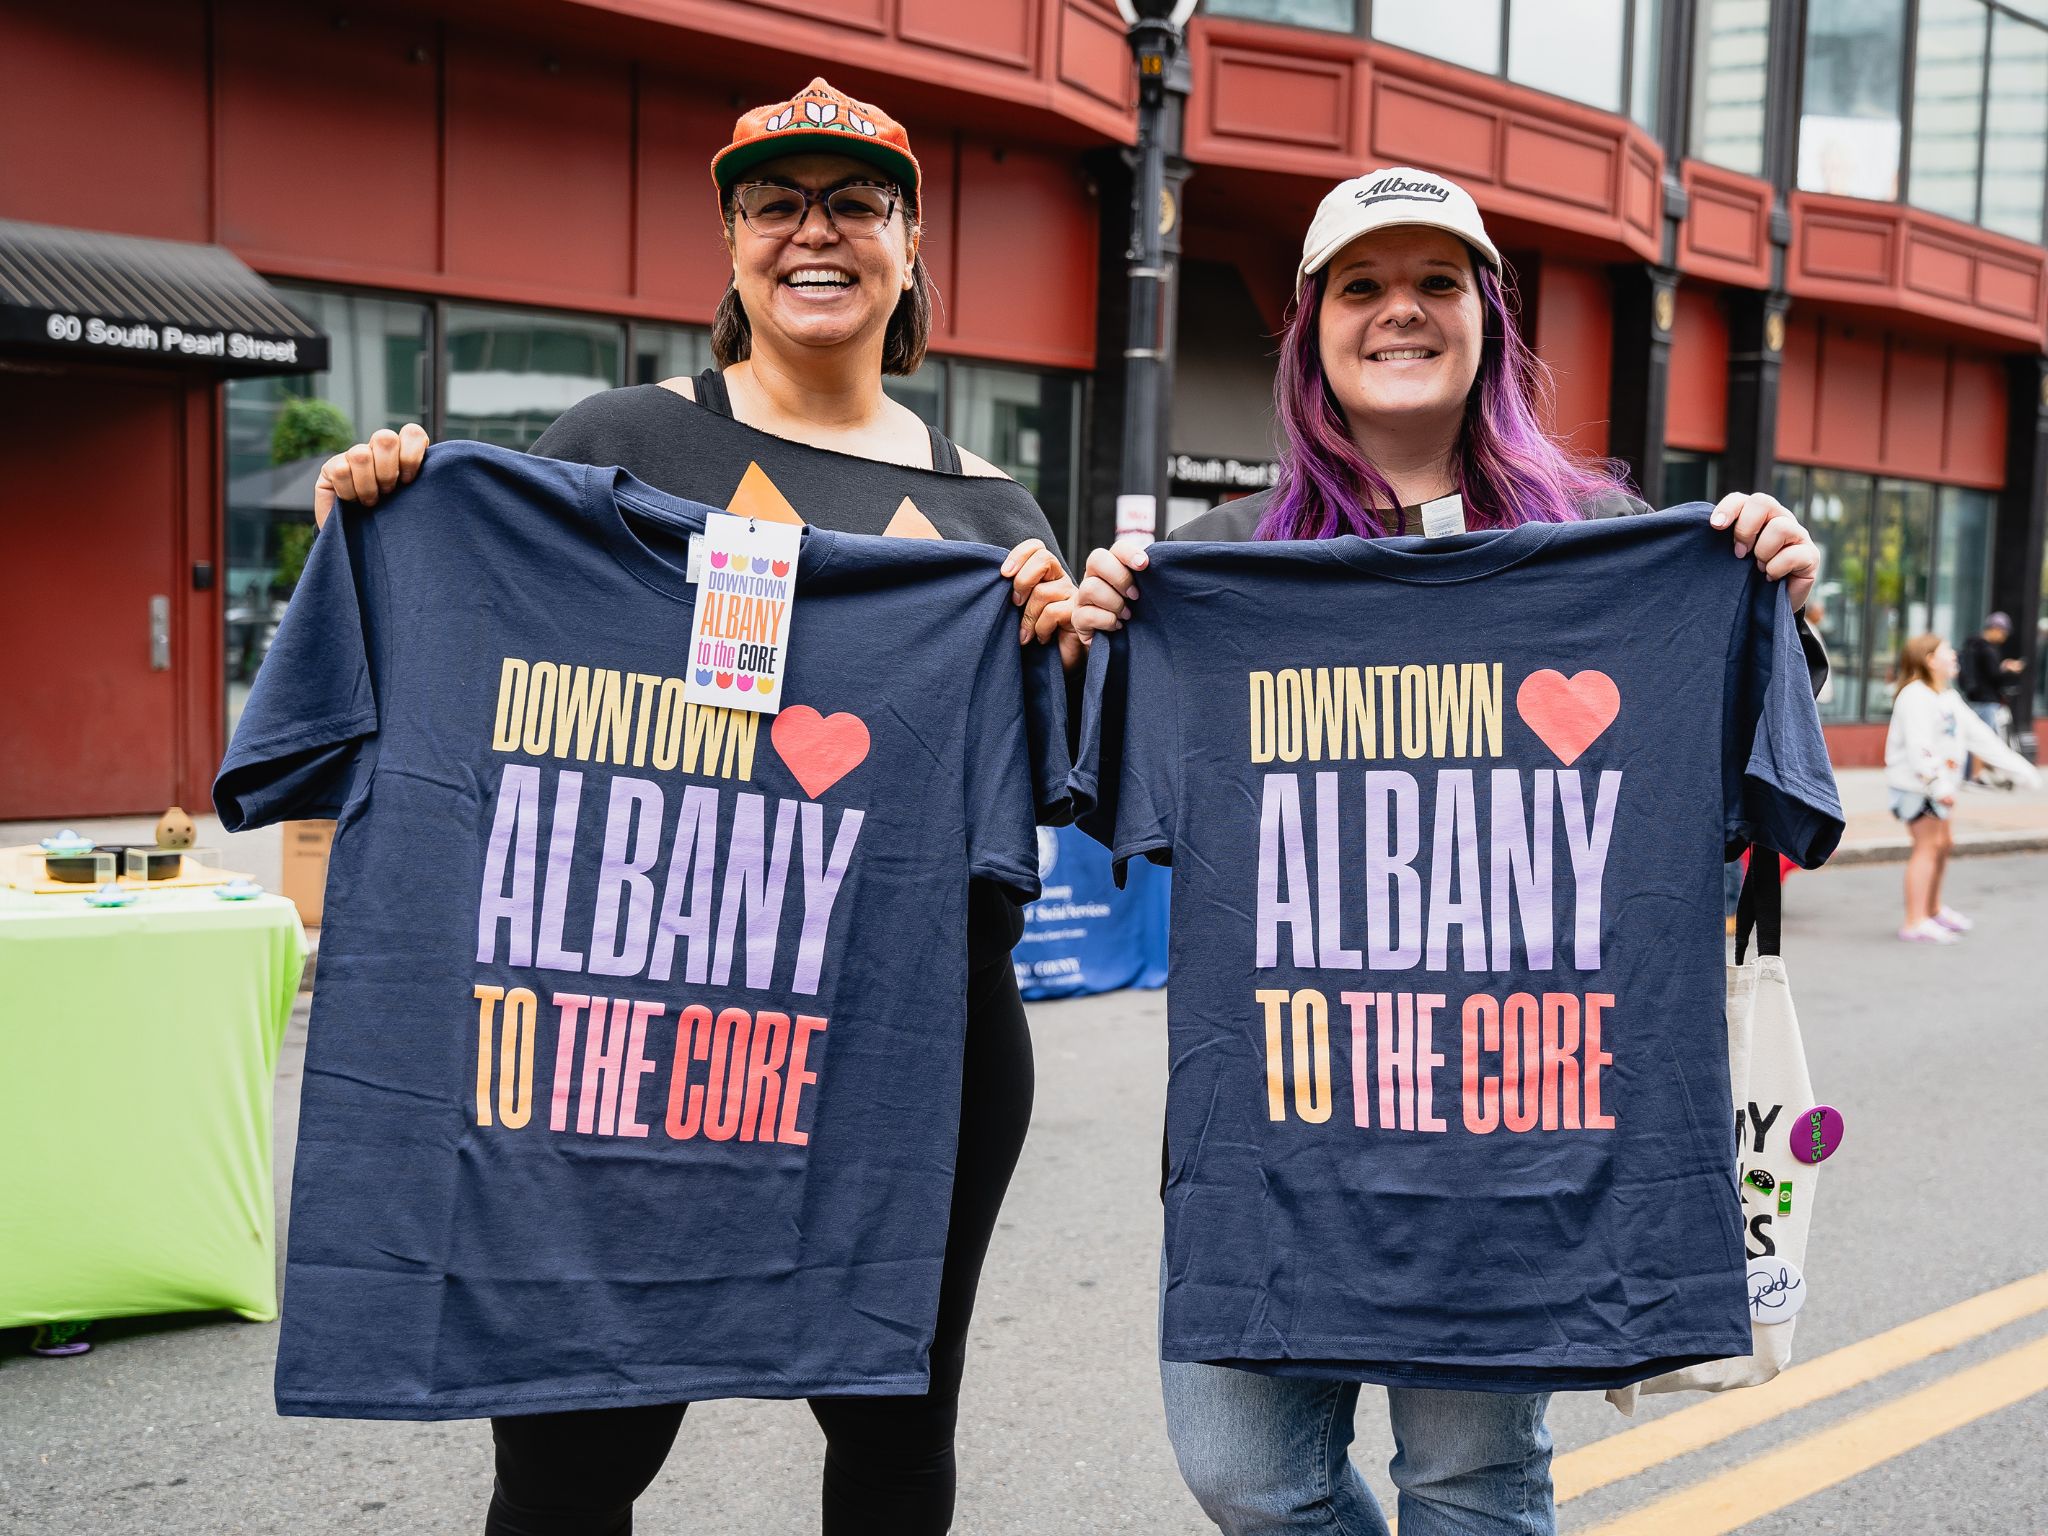 Two women stand in street holding t-shirts that read Downtown Albany to the Core